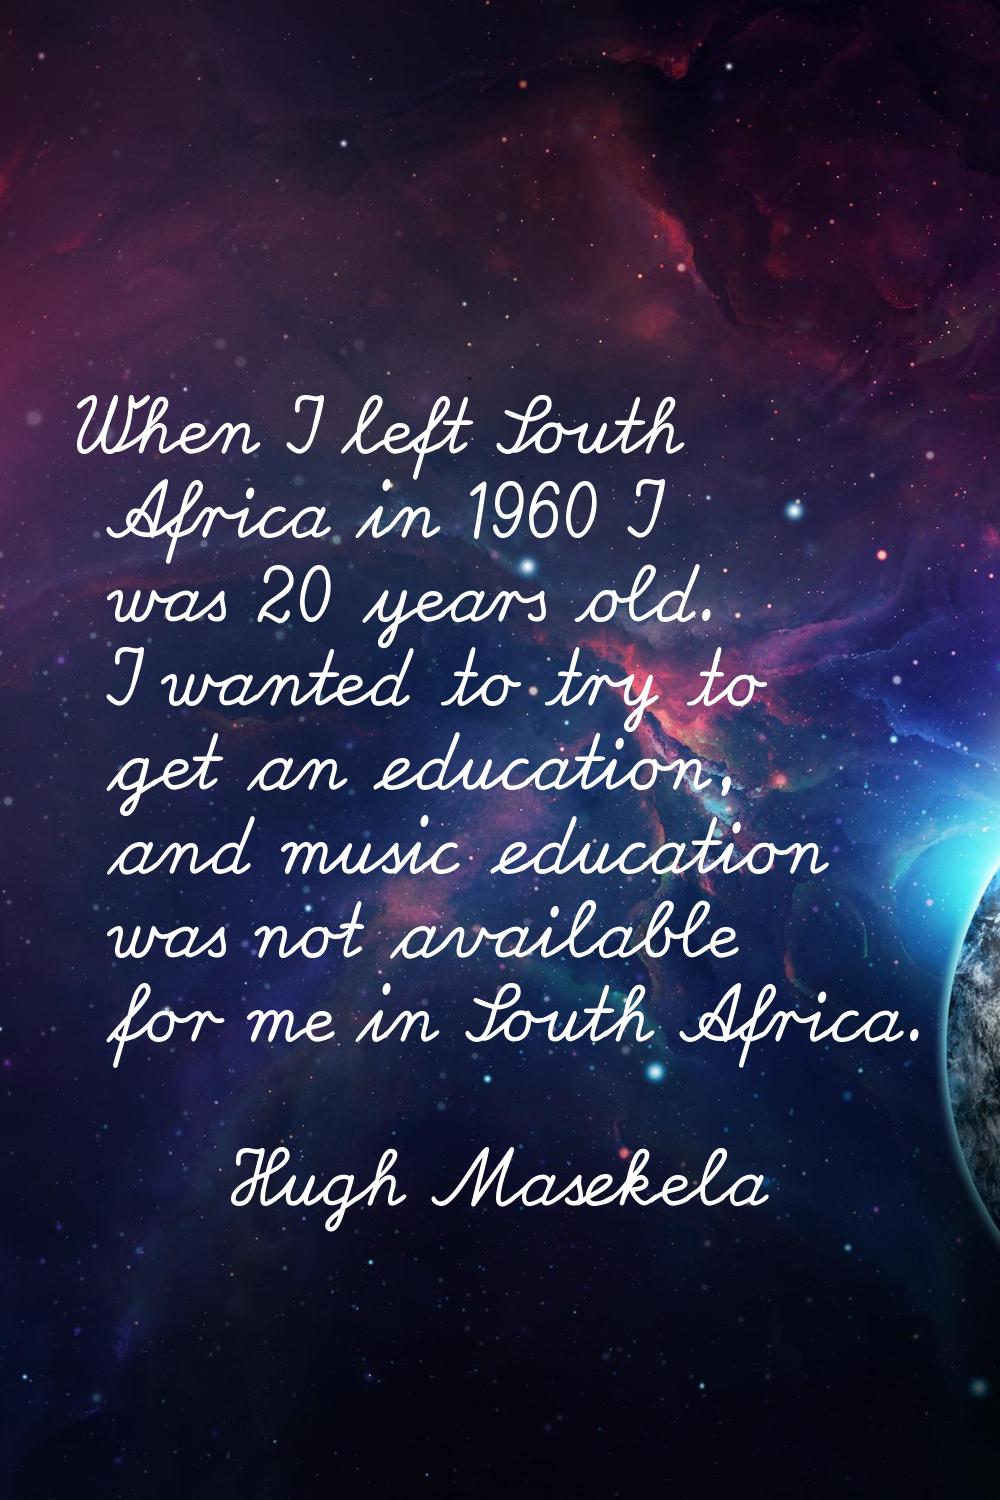 When I left South Africa in 1960 I was 20 years old. I wanted to try to get an education, and music